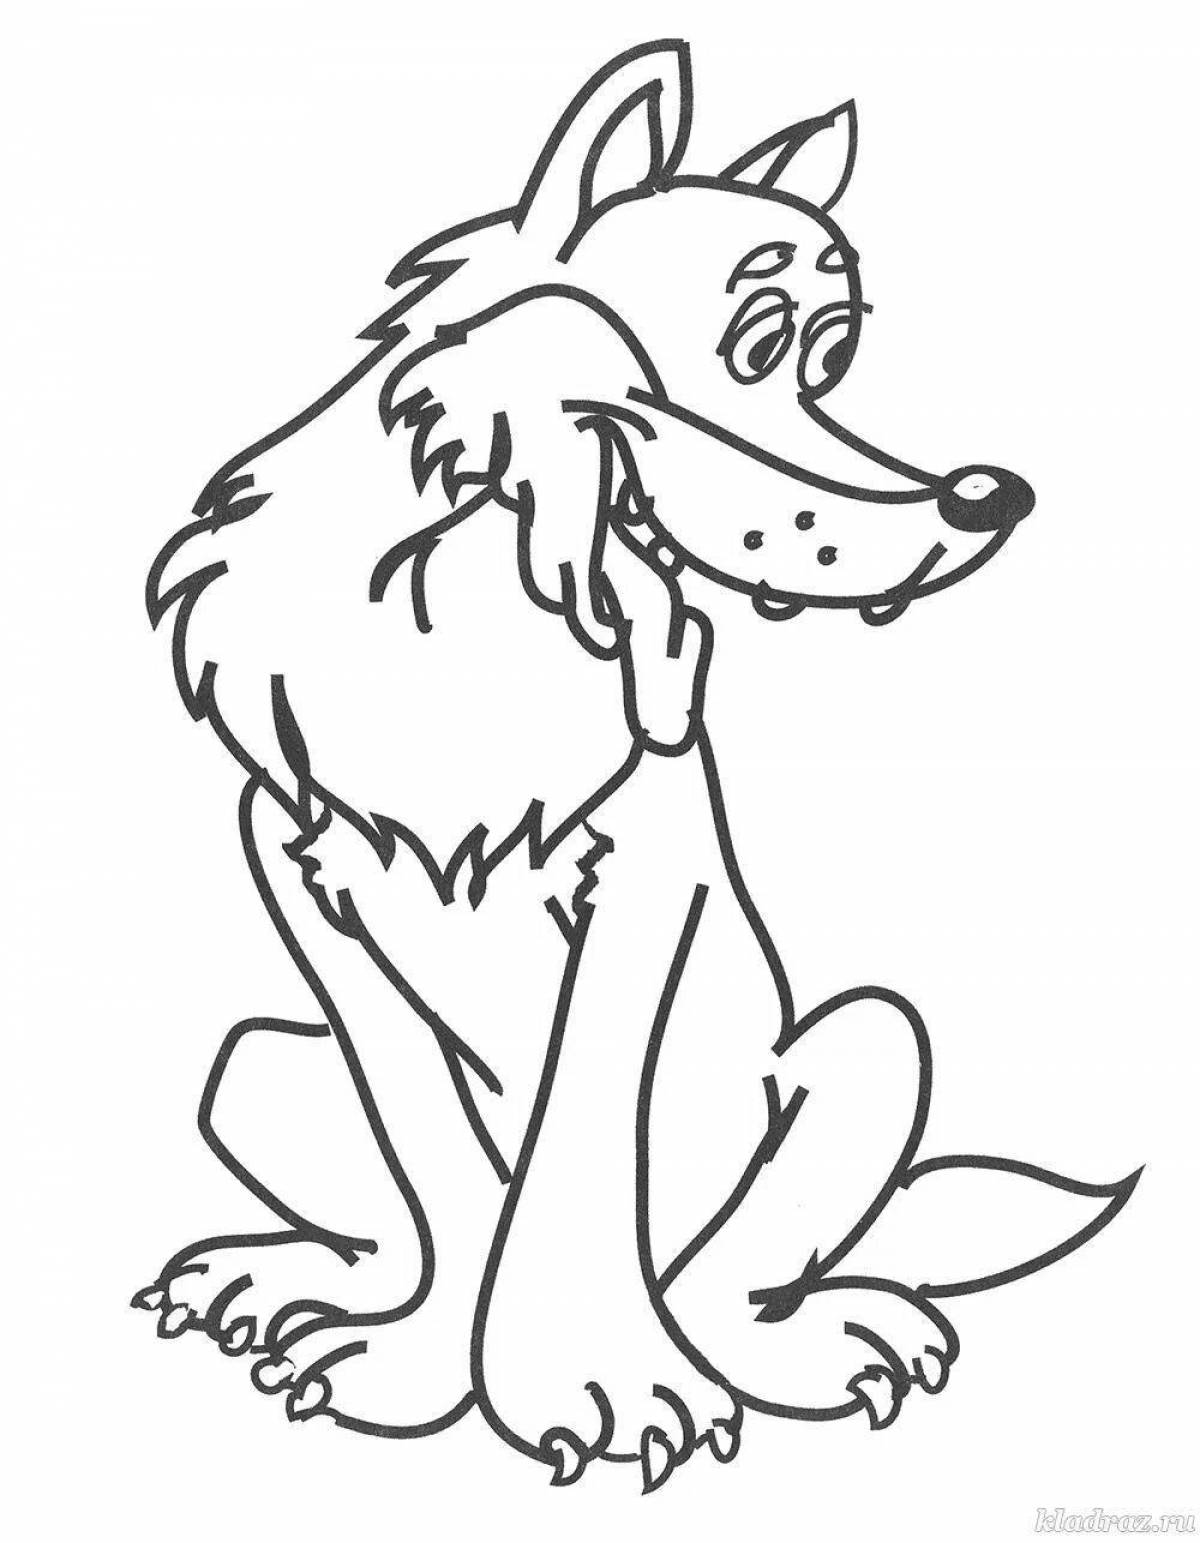 Fabulous wolf coloring page